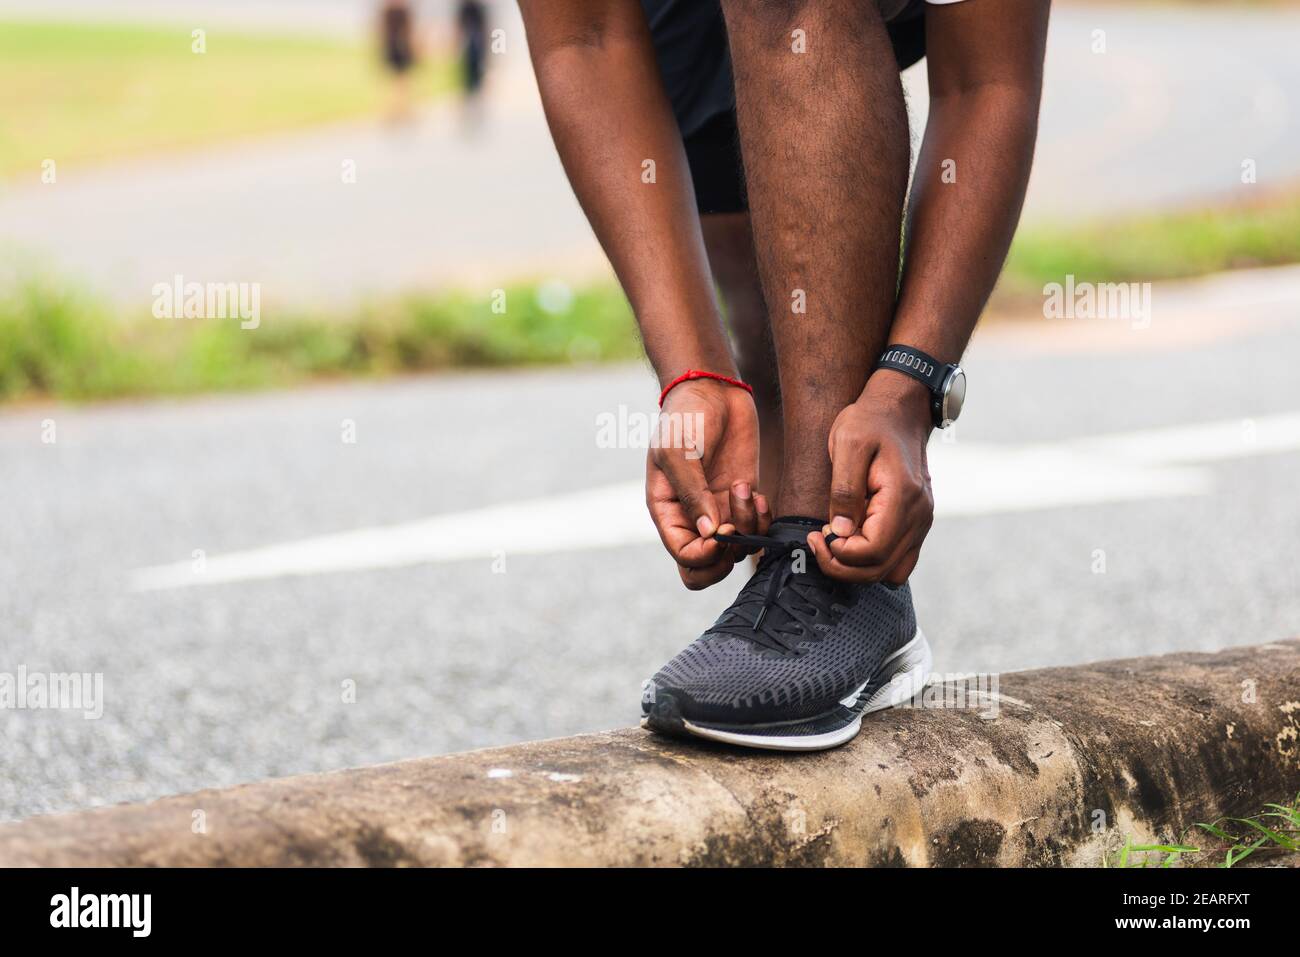 runner black man wear watch stand step on the footpath trying shoelace running shoes Stock Photo